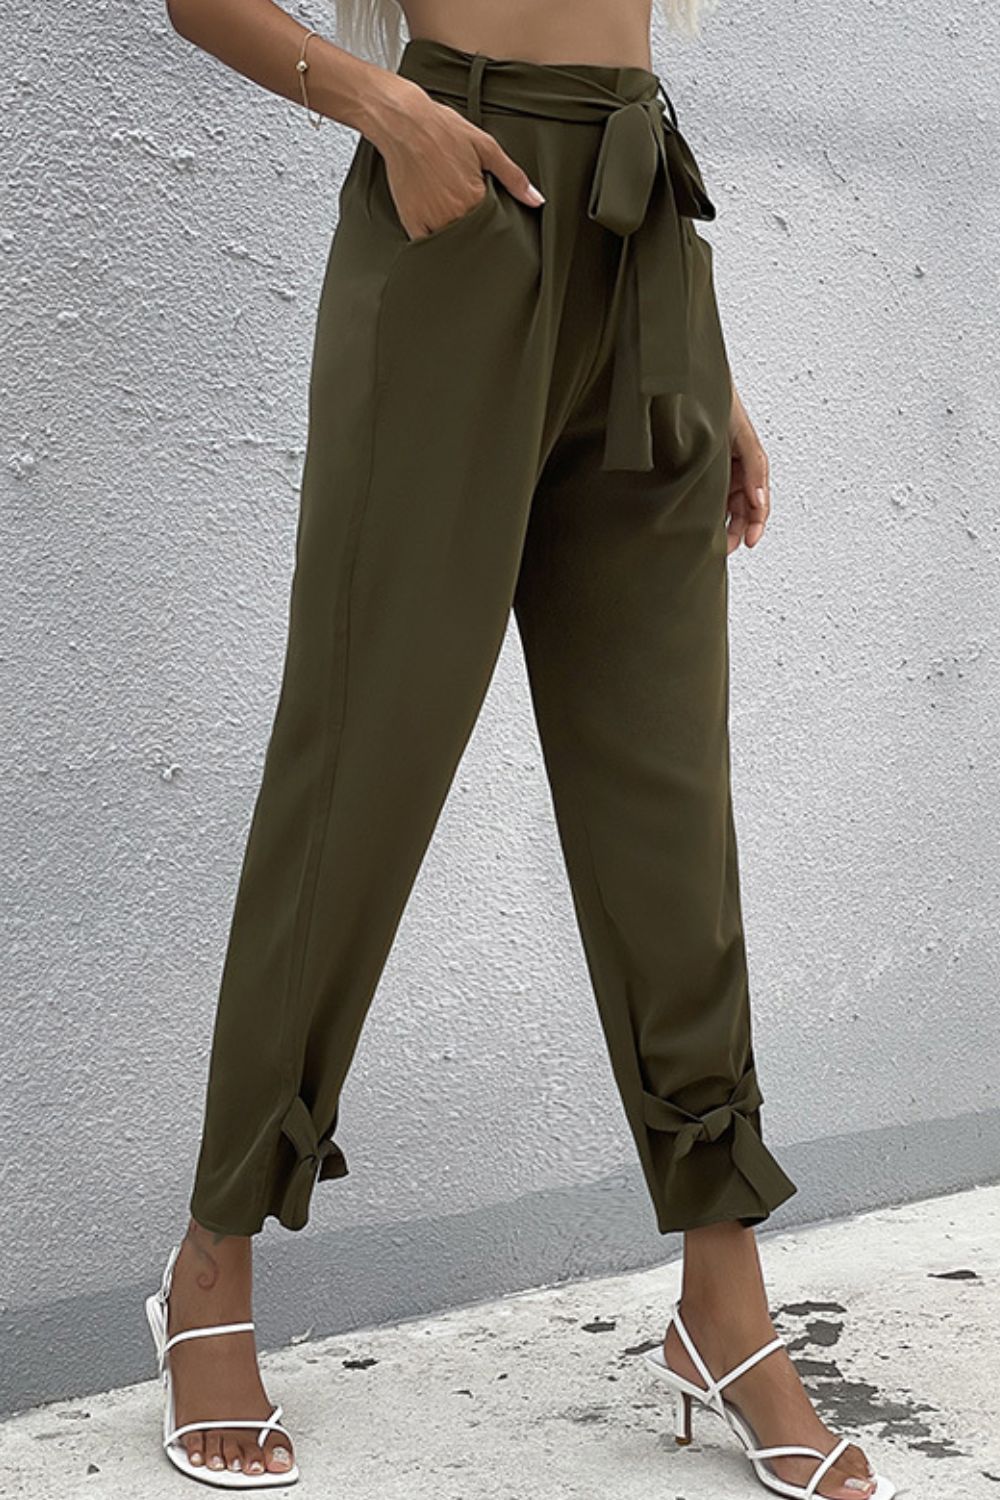 Tie Detail Belted Pants with Pockets - Pants - FITGGINS